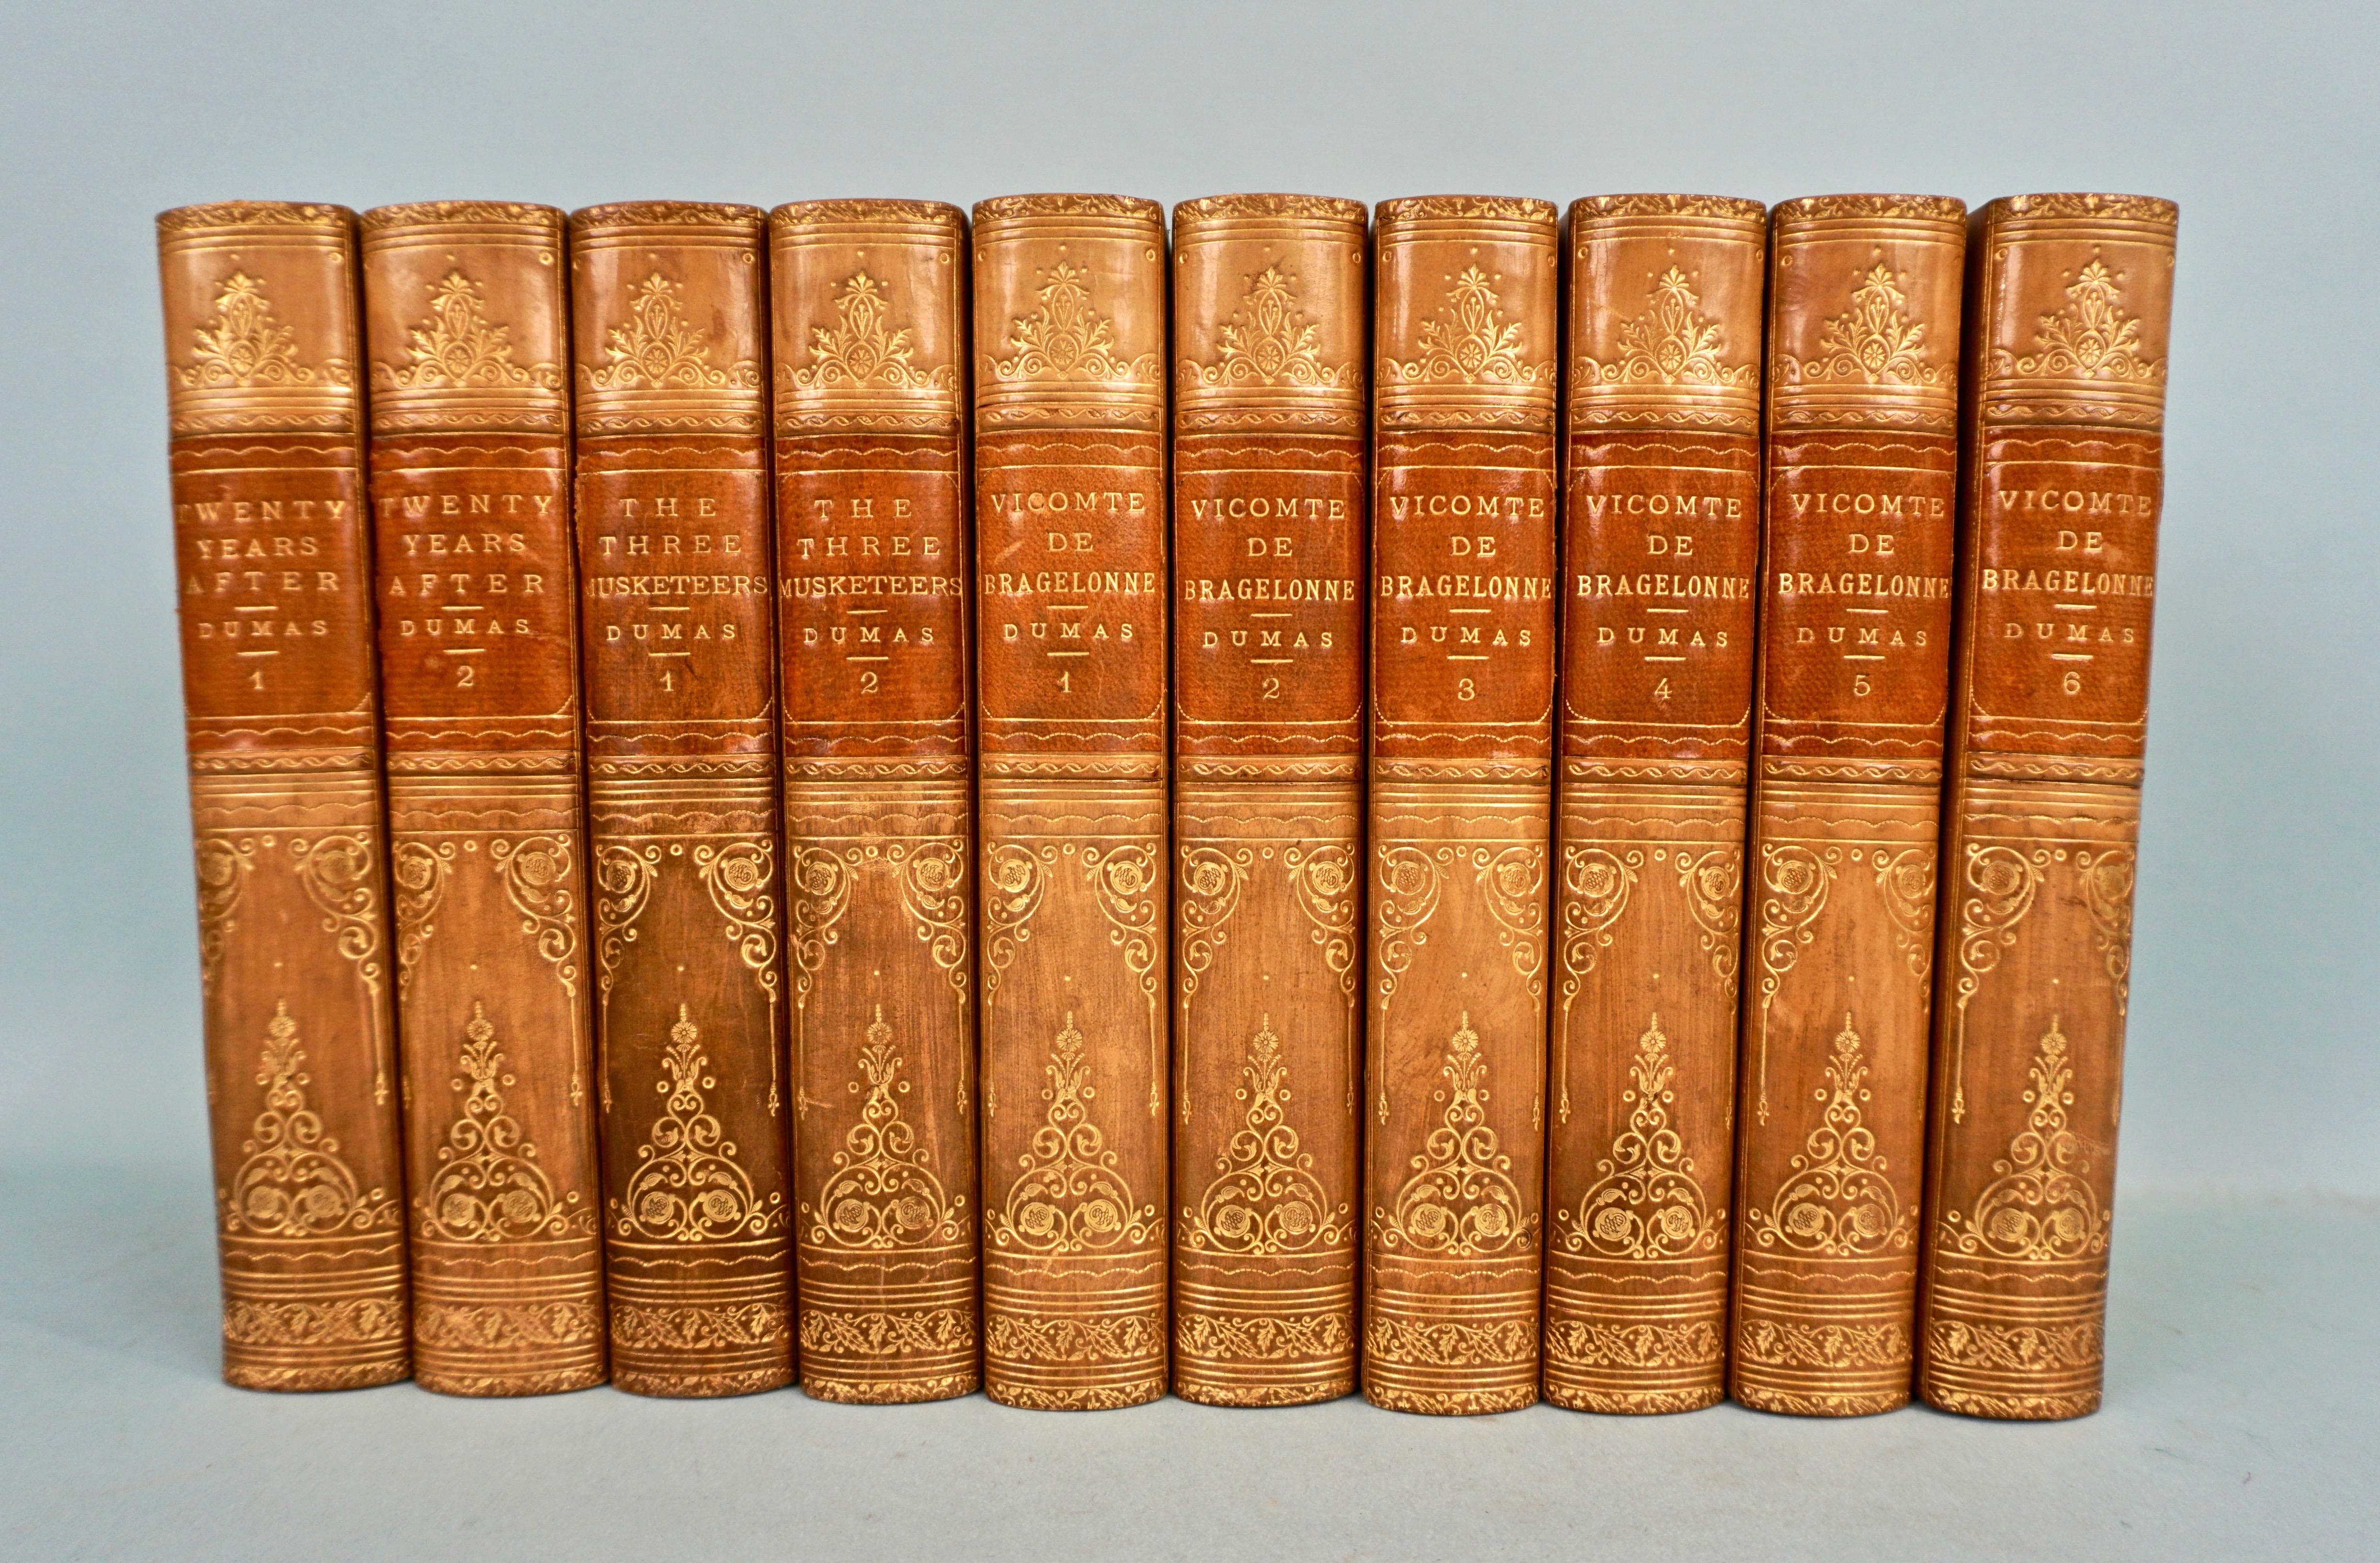 An attractive leatherbound set of the works of Alexandre Dumas in 10 volumes bound in 3/4 gilt calf with marbleized boards and endpapers, the gilt tooled spines with raised bands. Top of pages are gilt. Includes such classics as the Three Musketeers